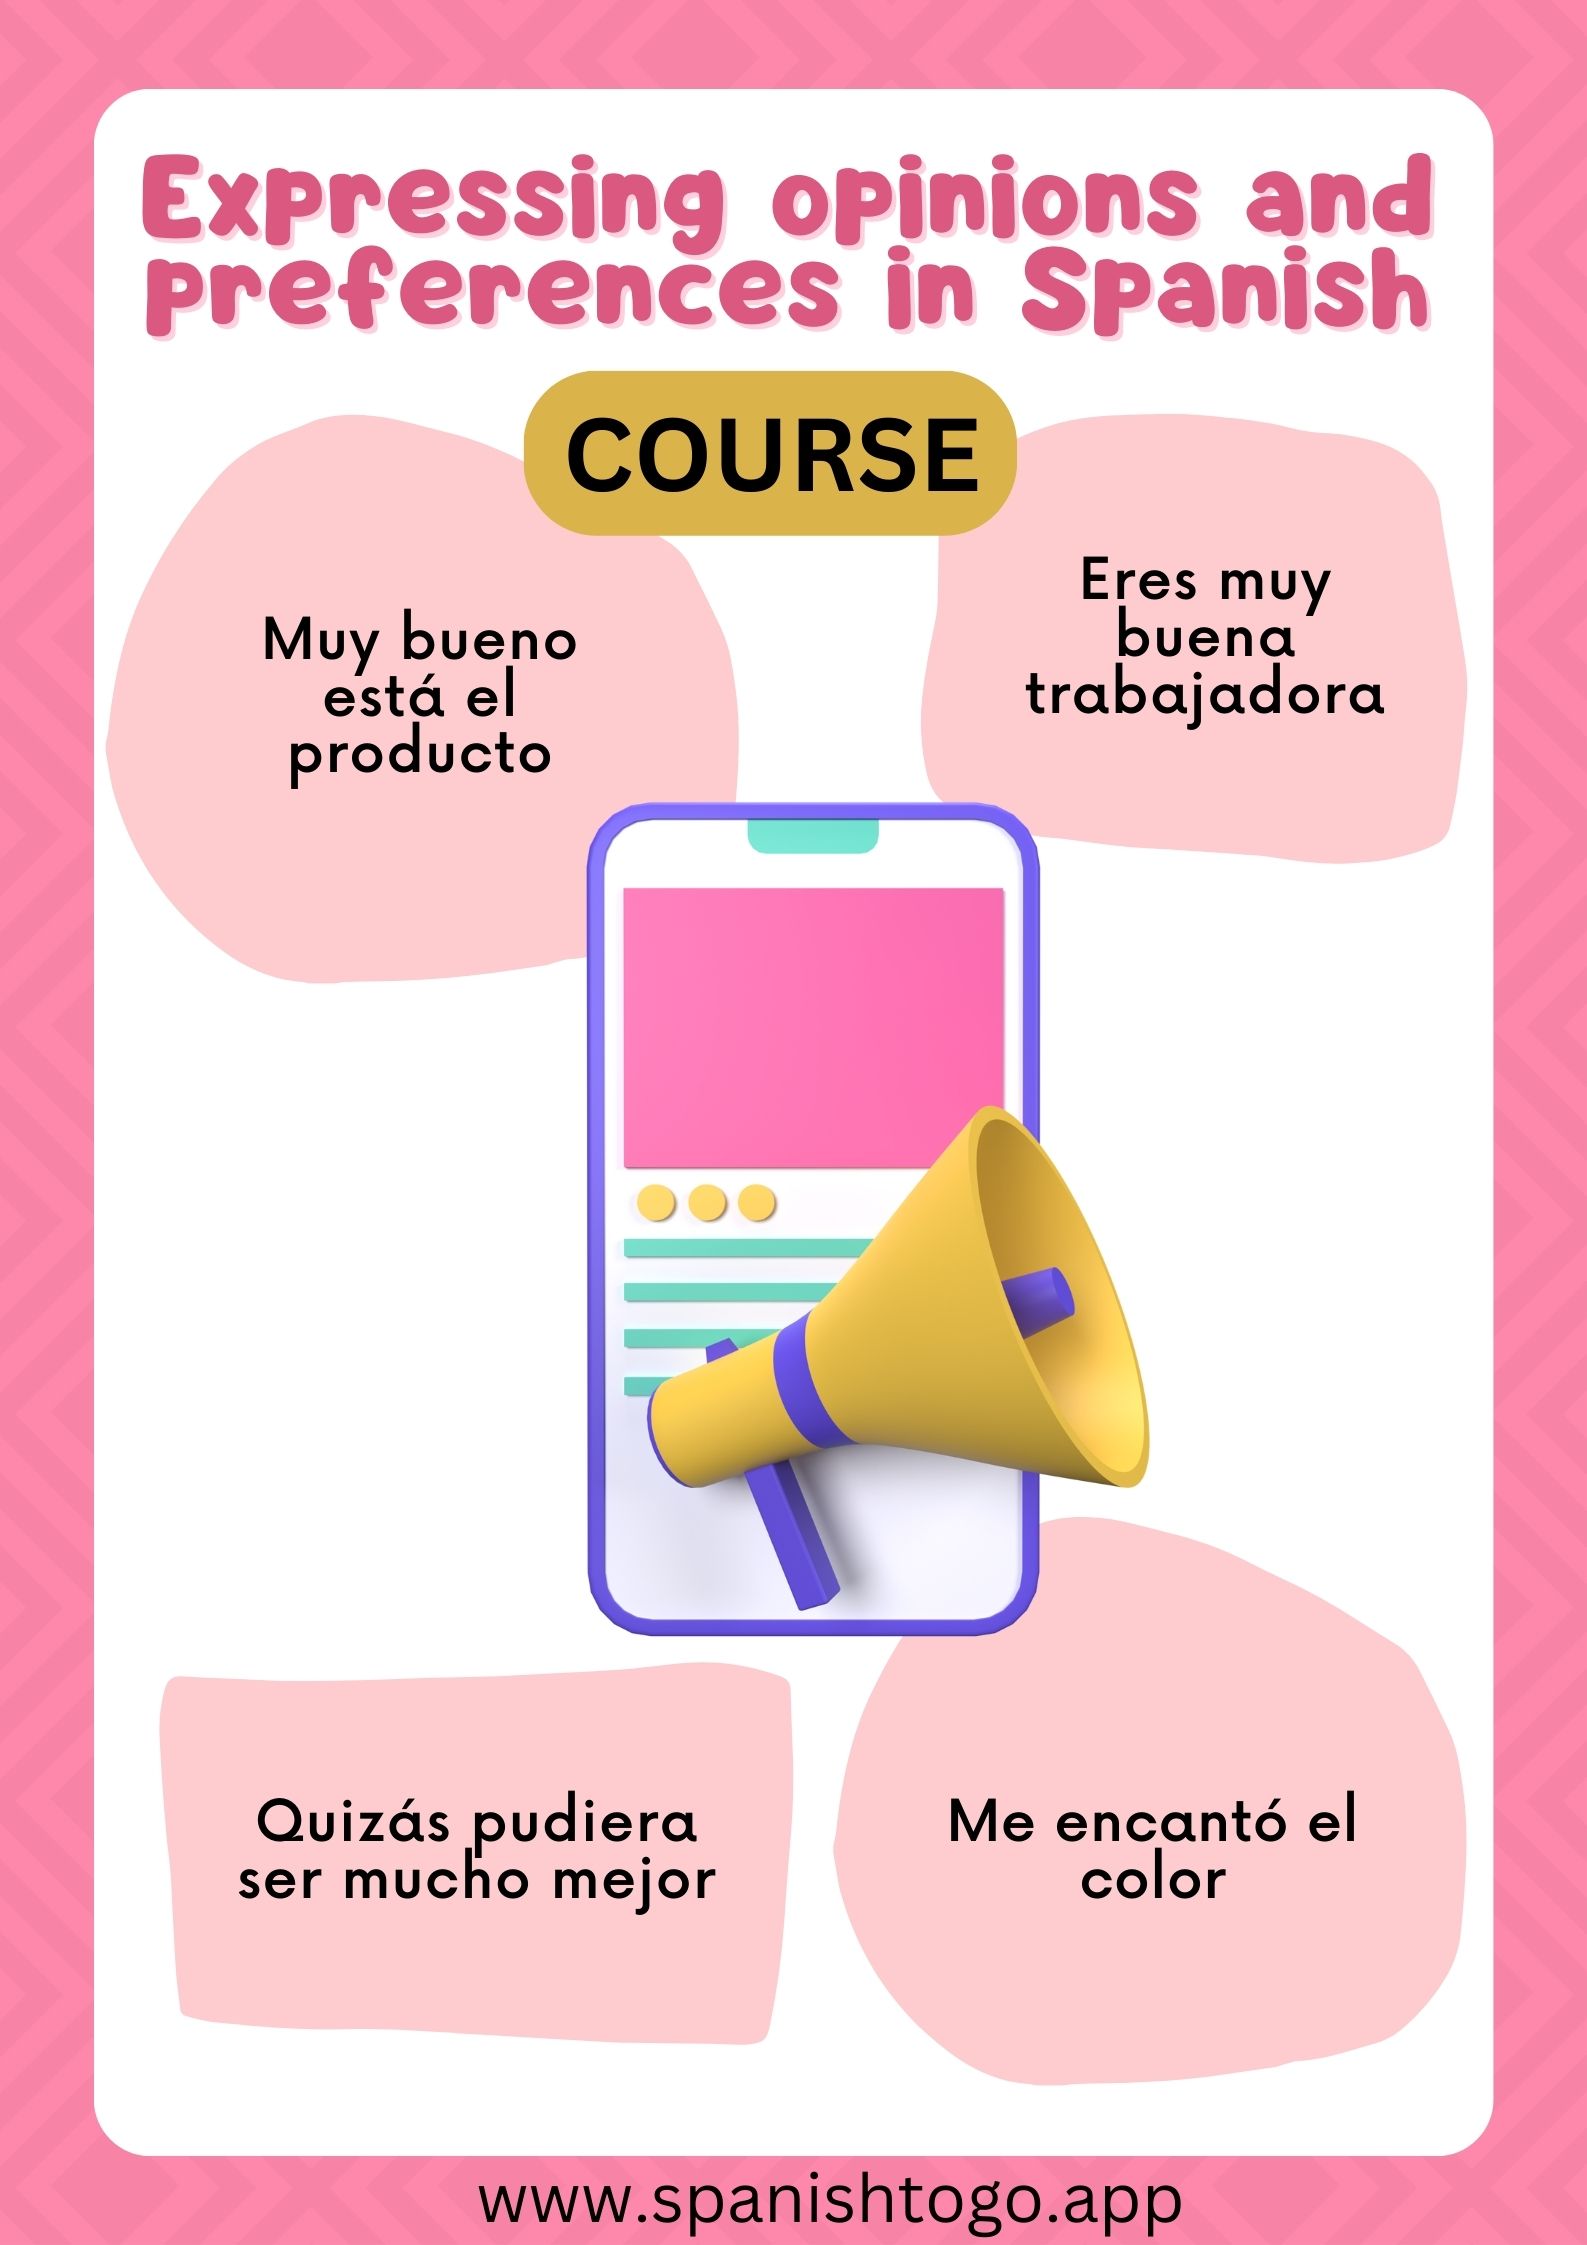 Expressing opinions and preferences in Spanish